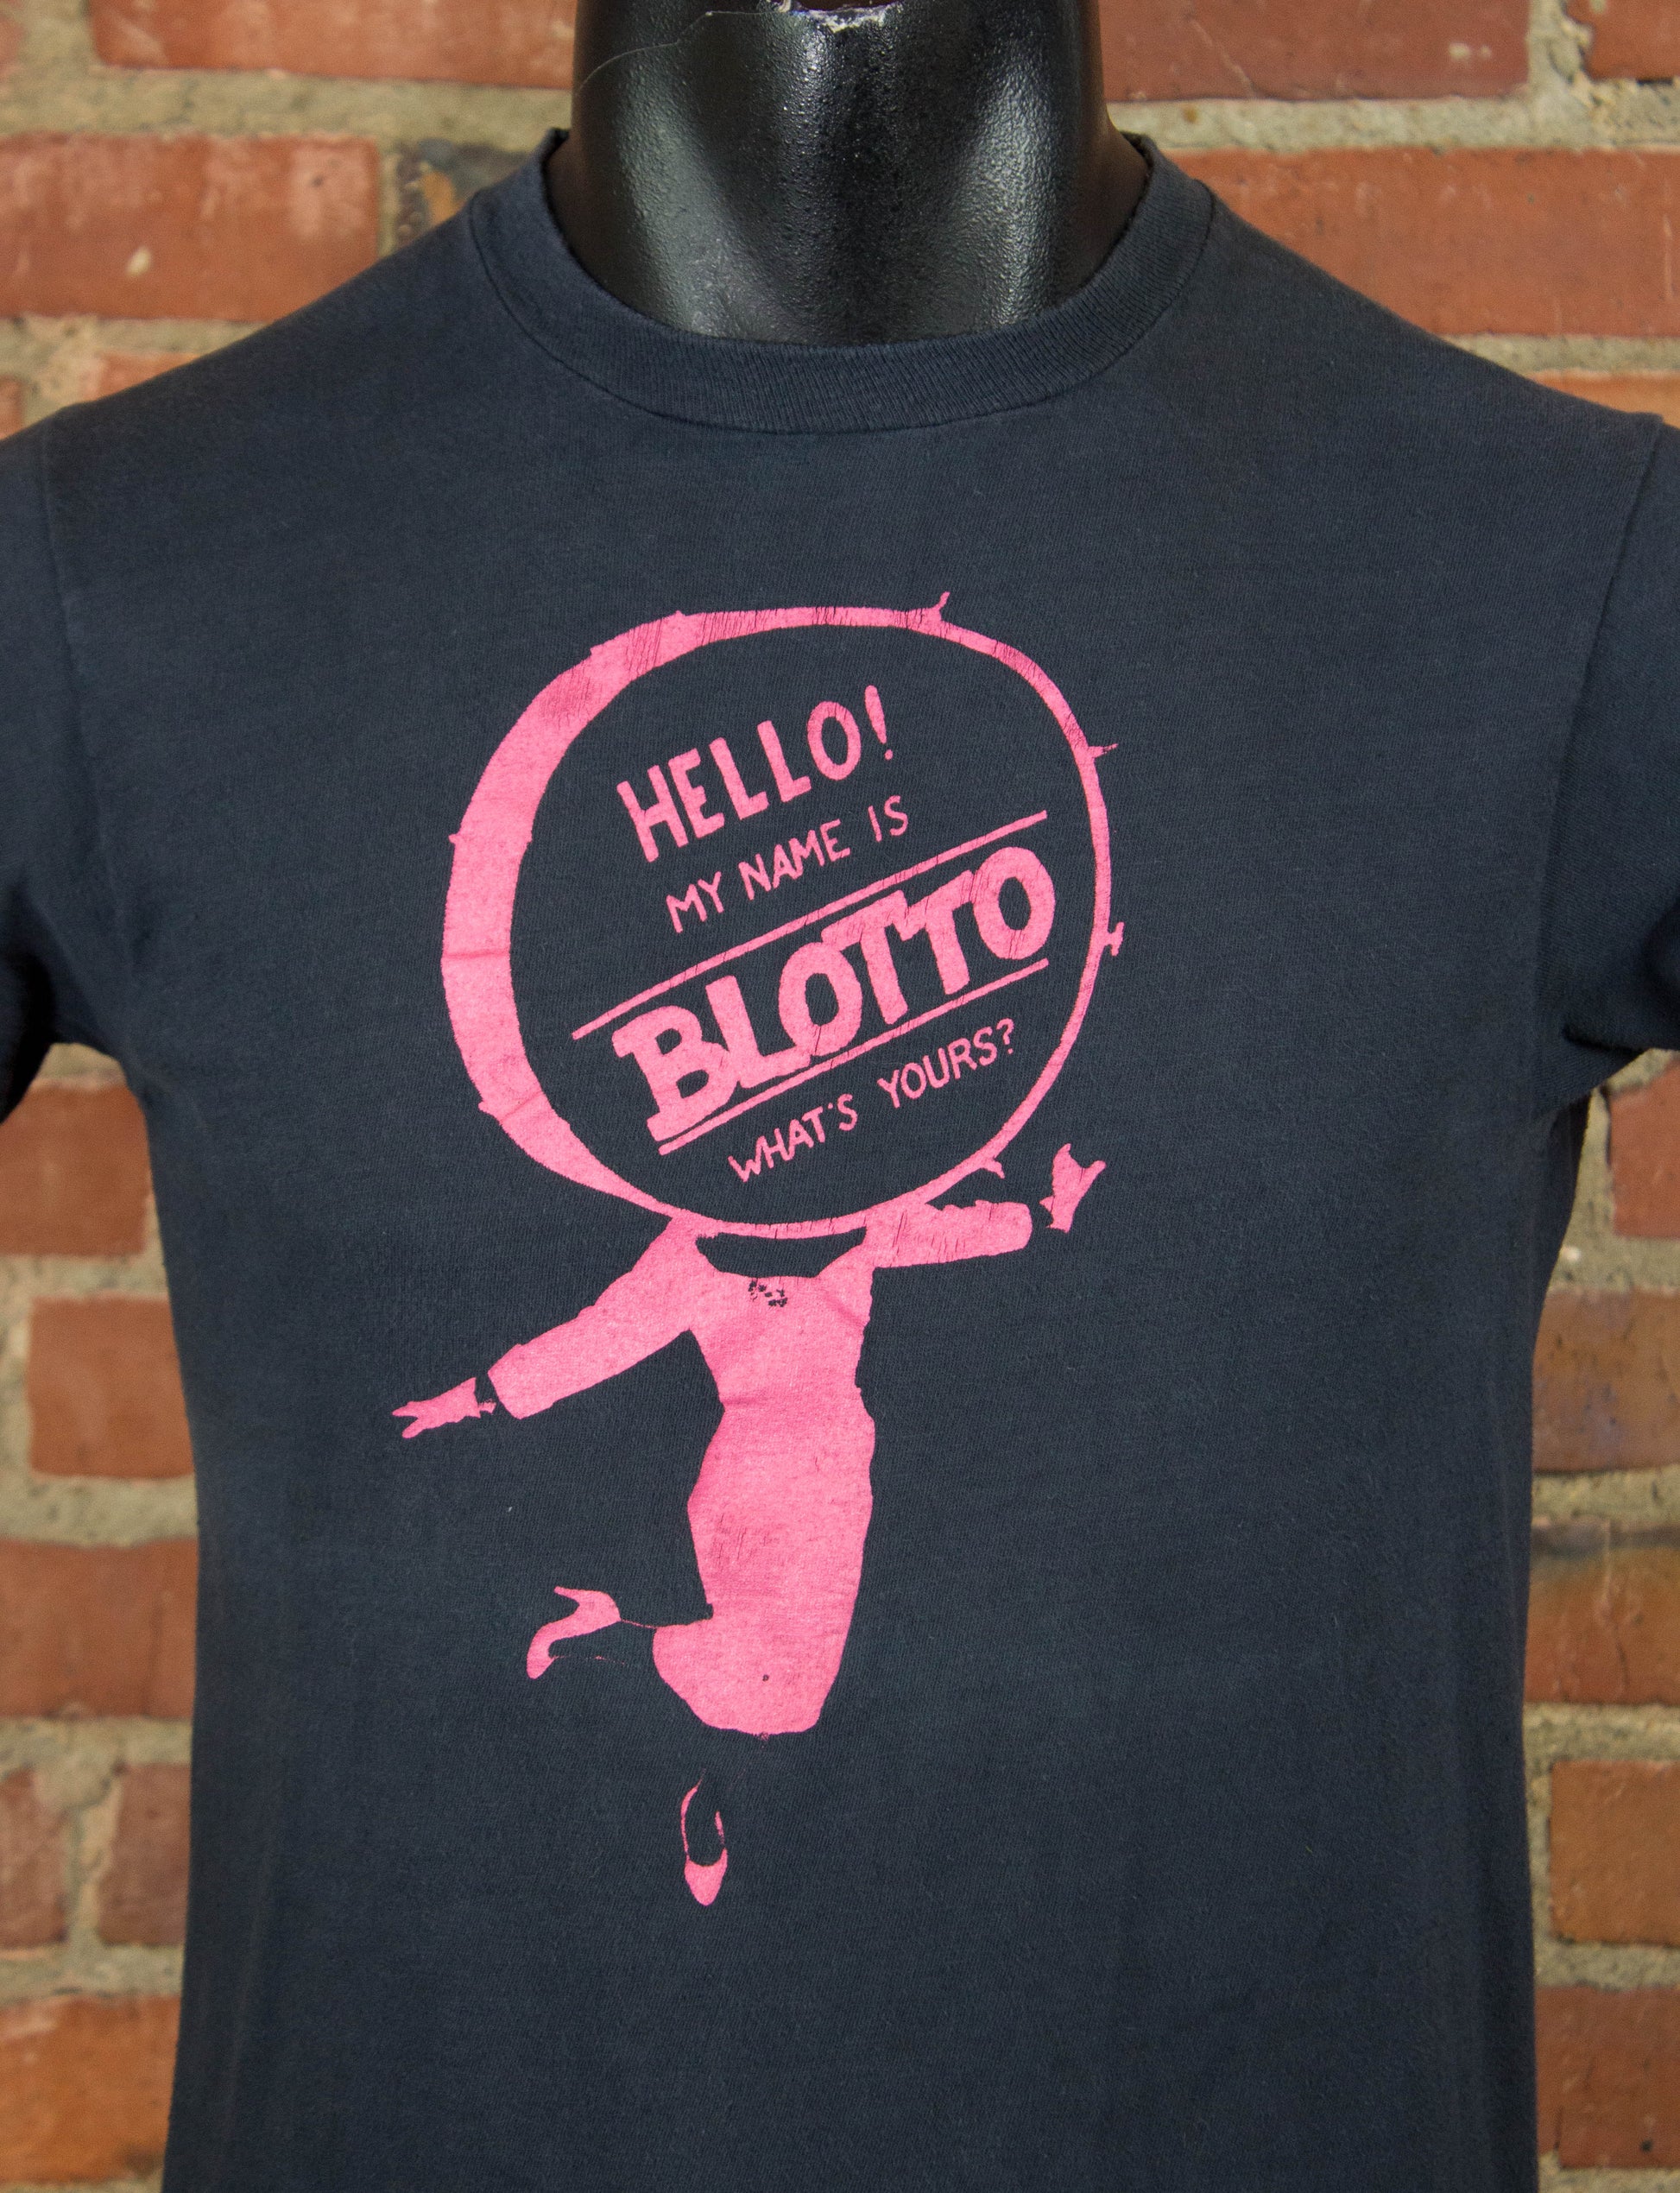 Vintage 1979 Hello! My Name is Blotto What's Yours? Black and Pink Concert T Shirt Unisex Small